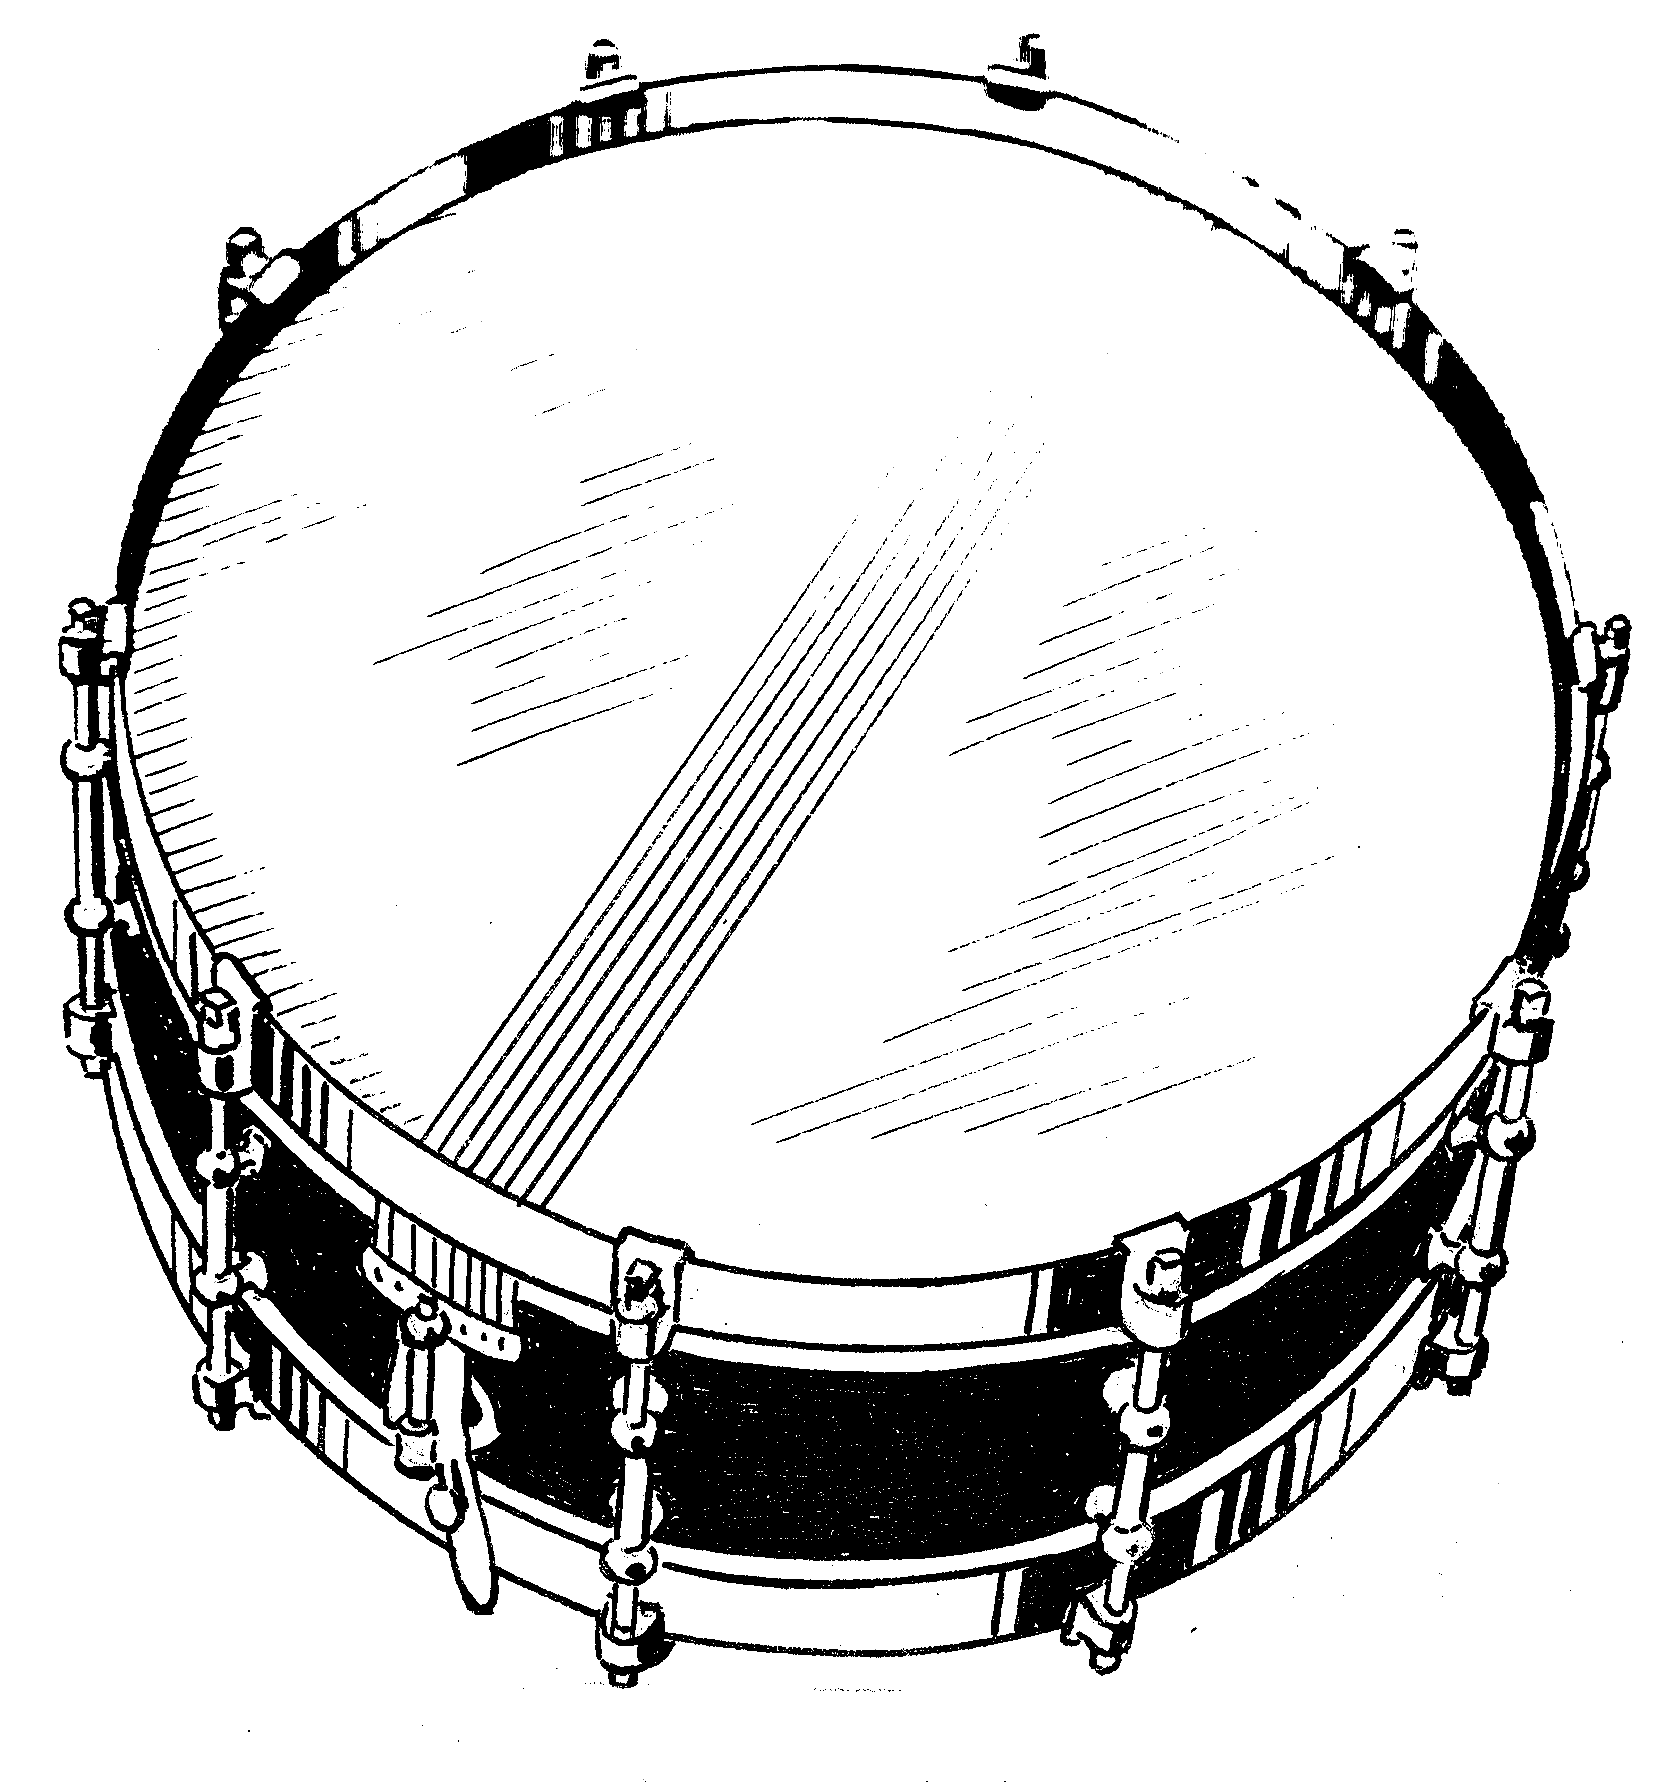 Snare Drum icon. This is a dr